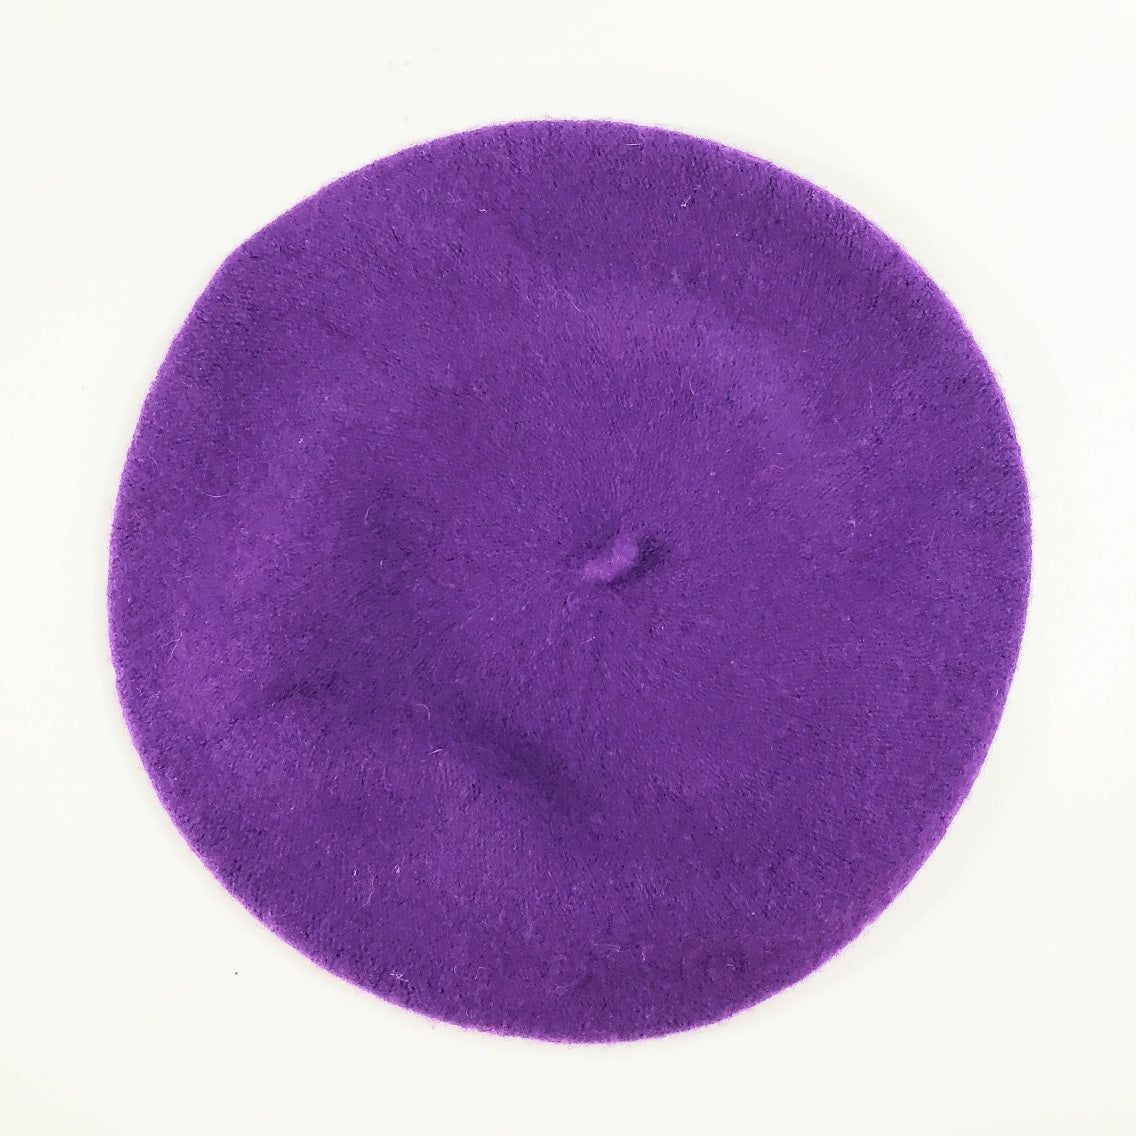 11" diameter "French" style wool blend knit beret in bright purple